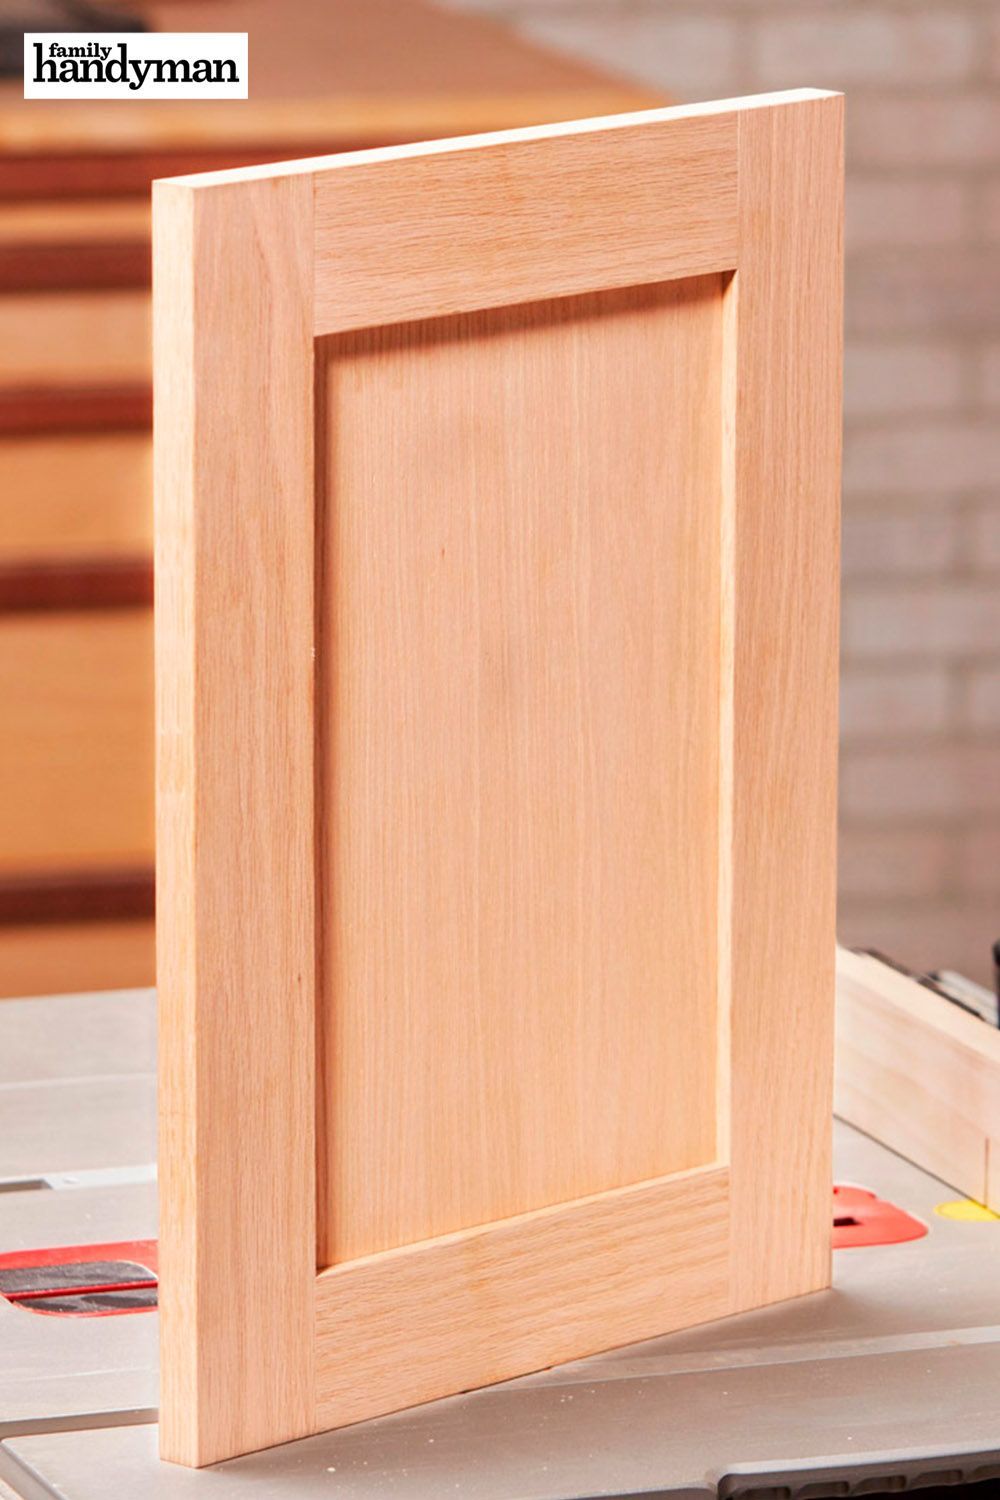 Quick and Easy DIY Shaker Cabinet Doors - Quick and Easy DIY Shaker Cabinet Doors -   17 diy Wood cabinet ideas